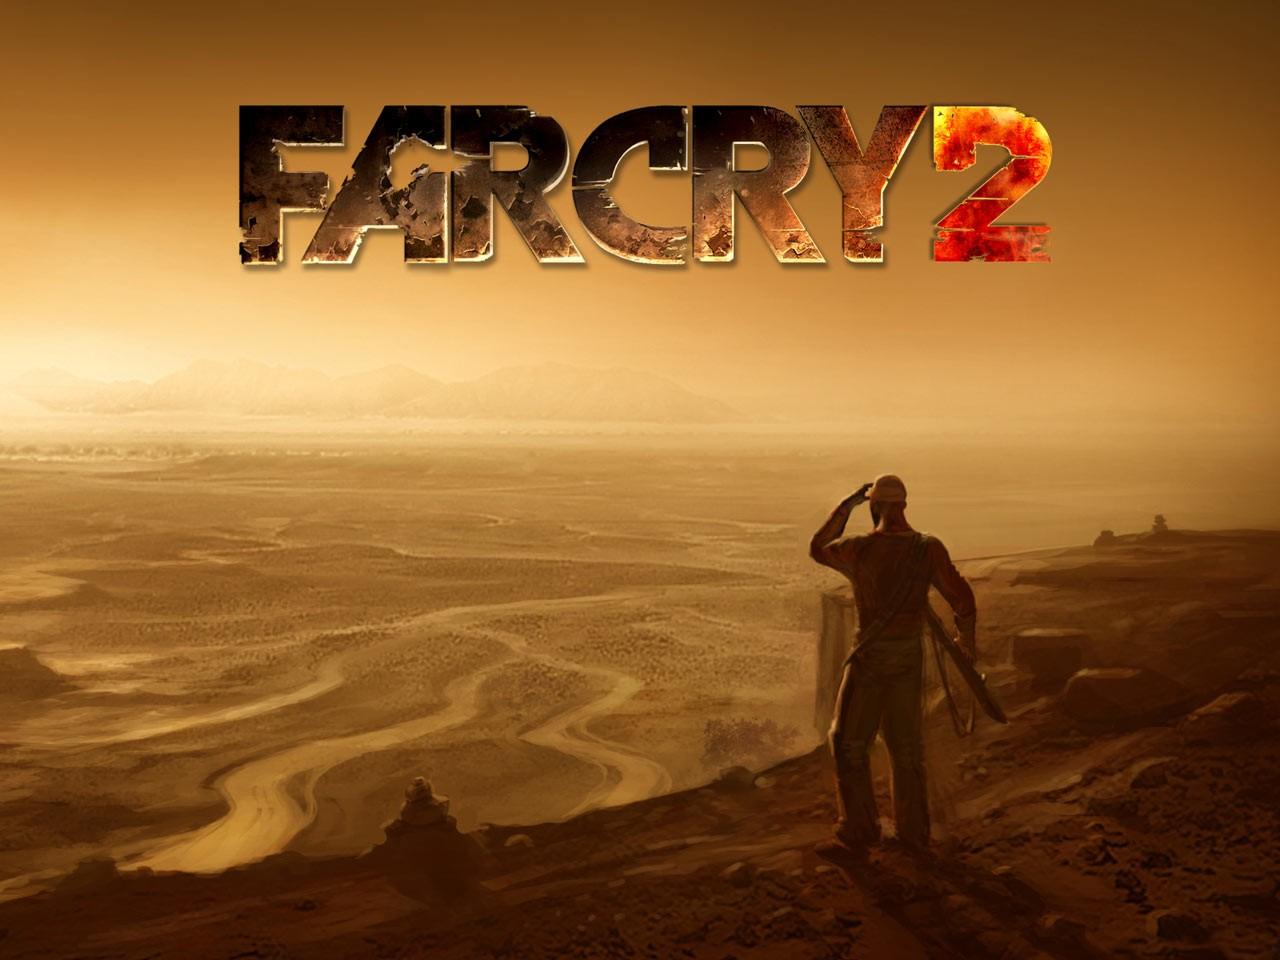 video game, far cry 2 wallpaper for mobile